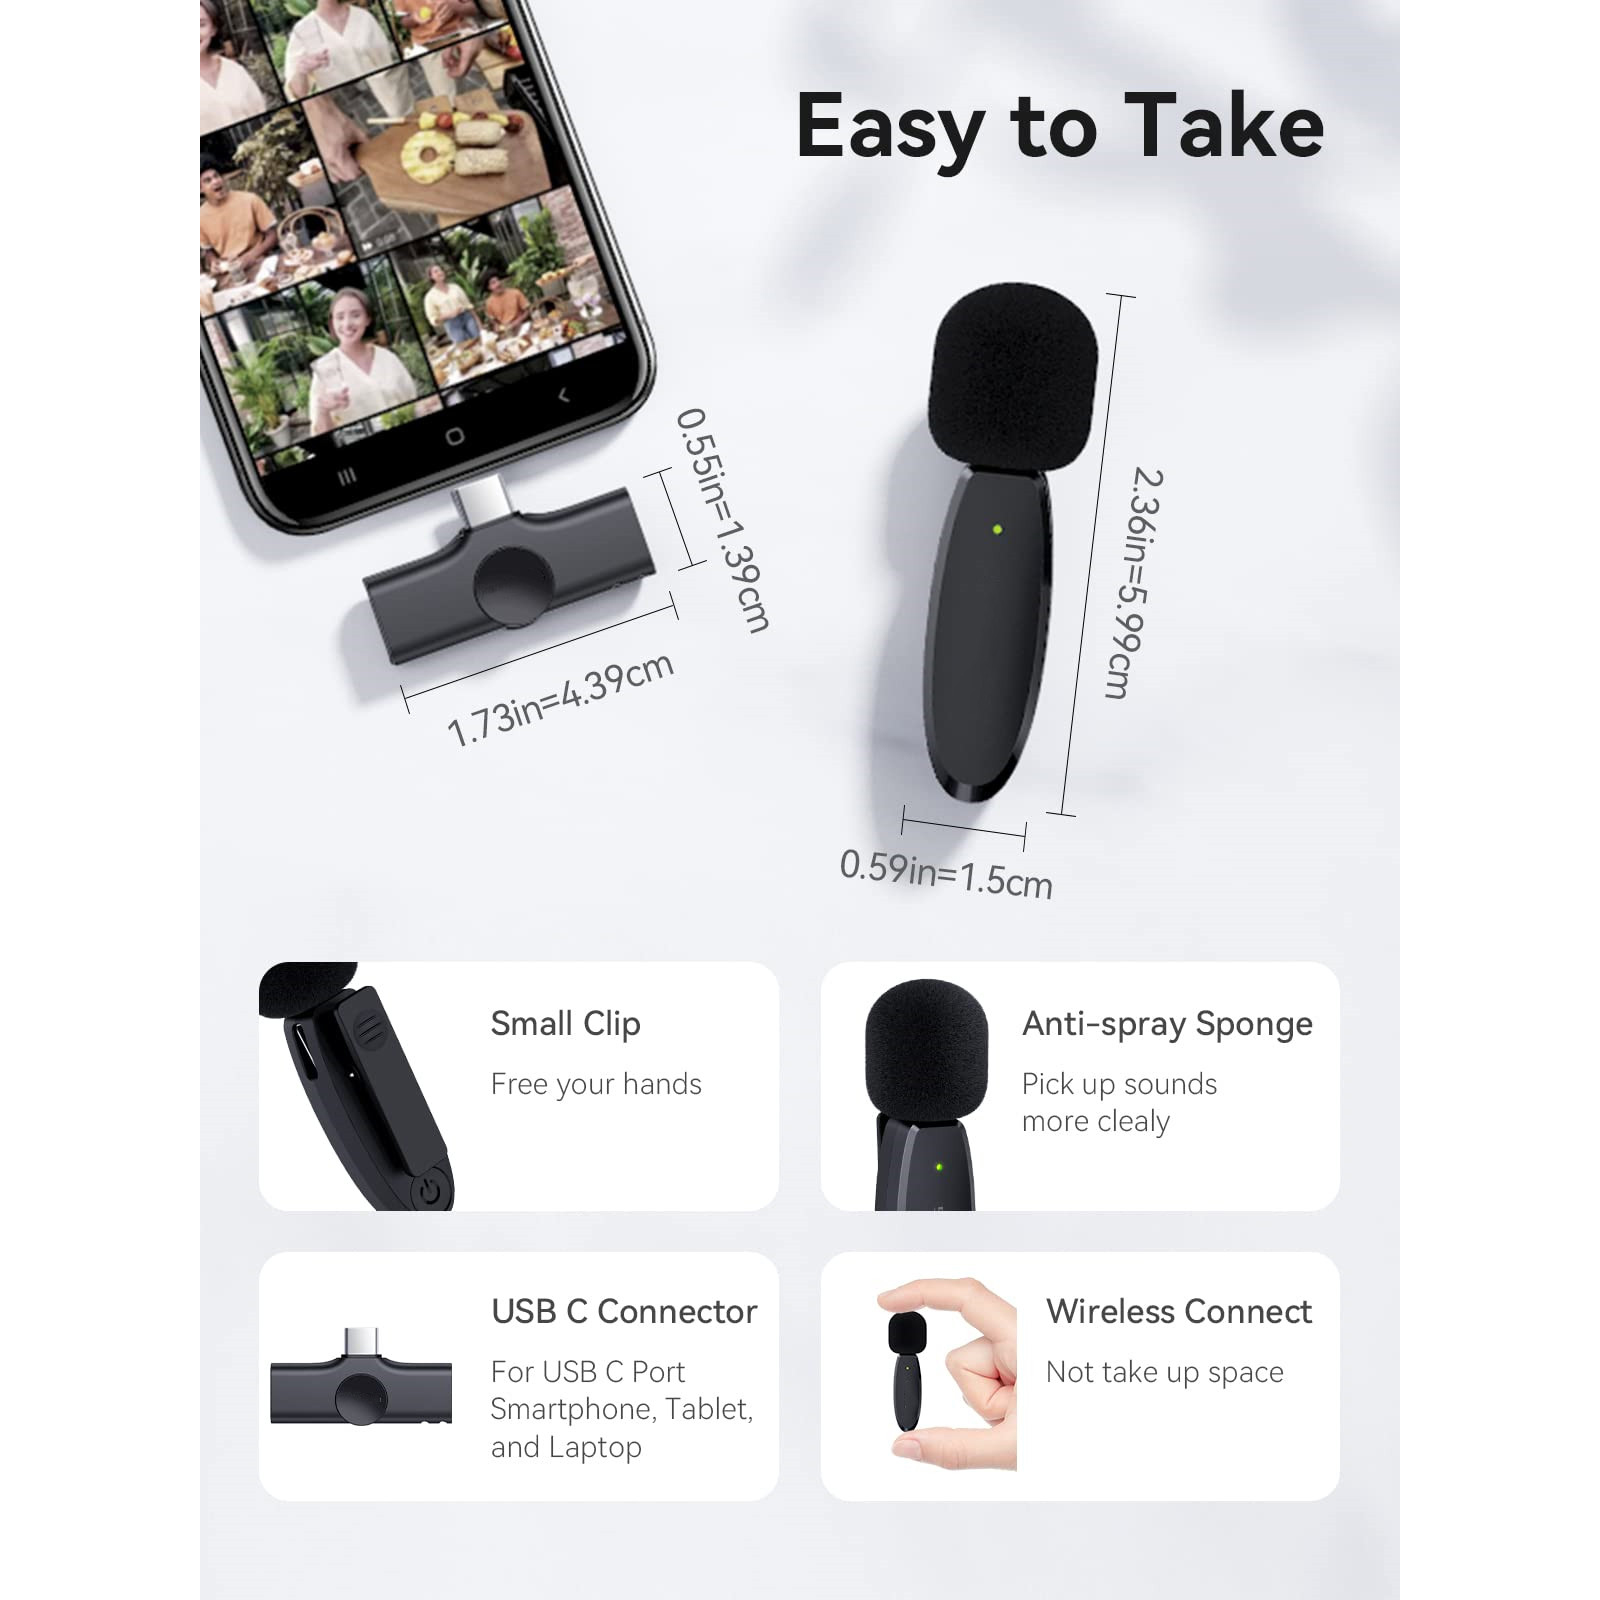 Mini Microphone: A tiny microphone for your smart device.